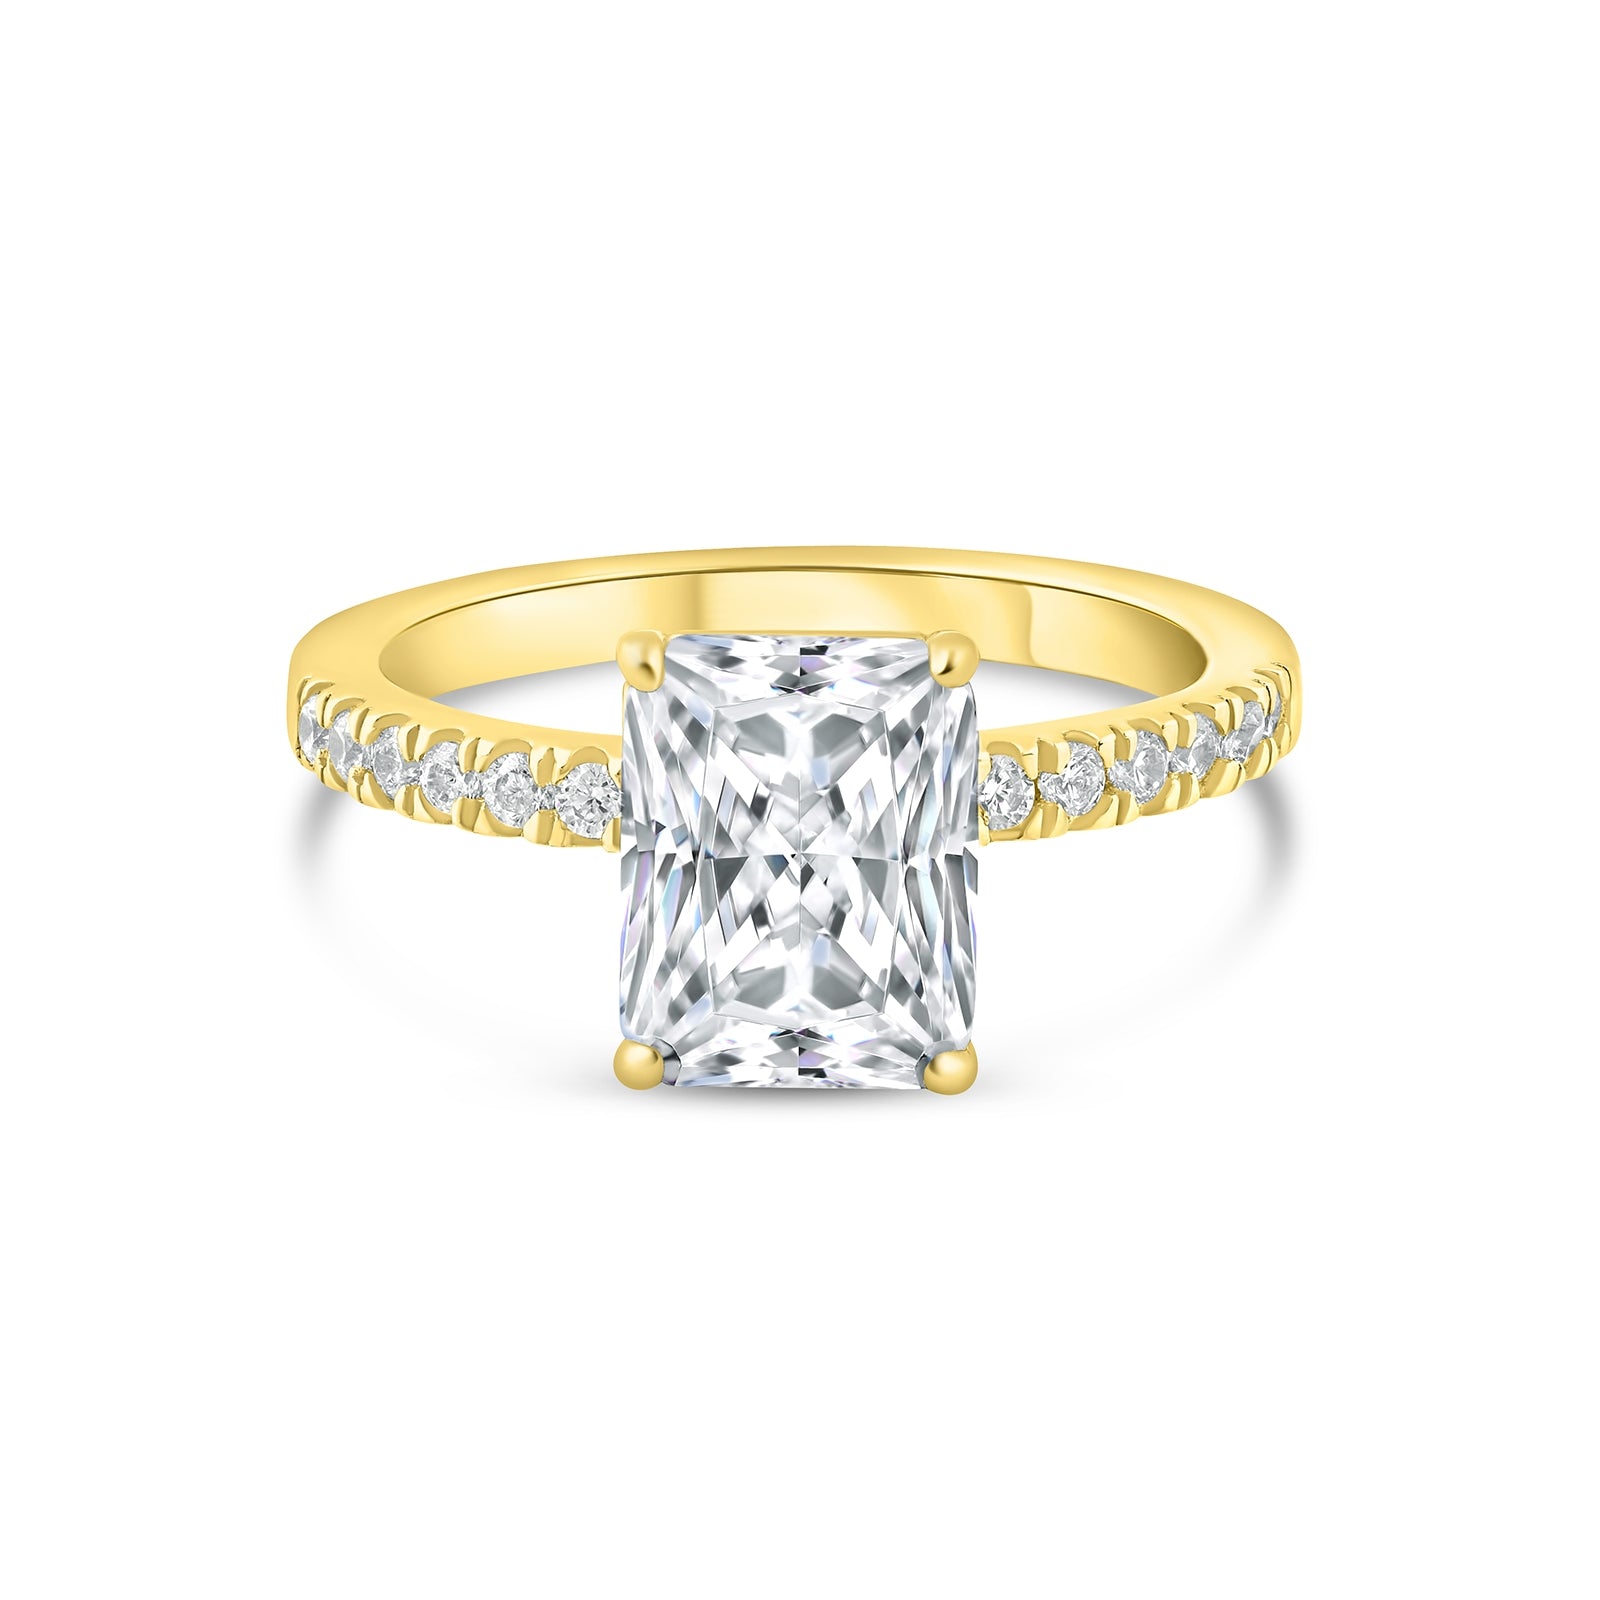 Gold 3 carat radiant cut engagement ring with half eternity band detailing